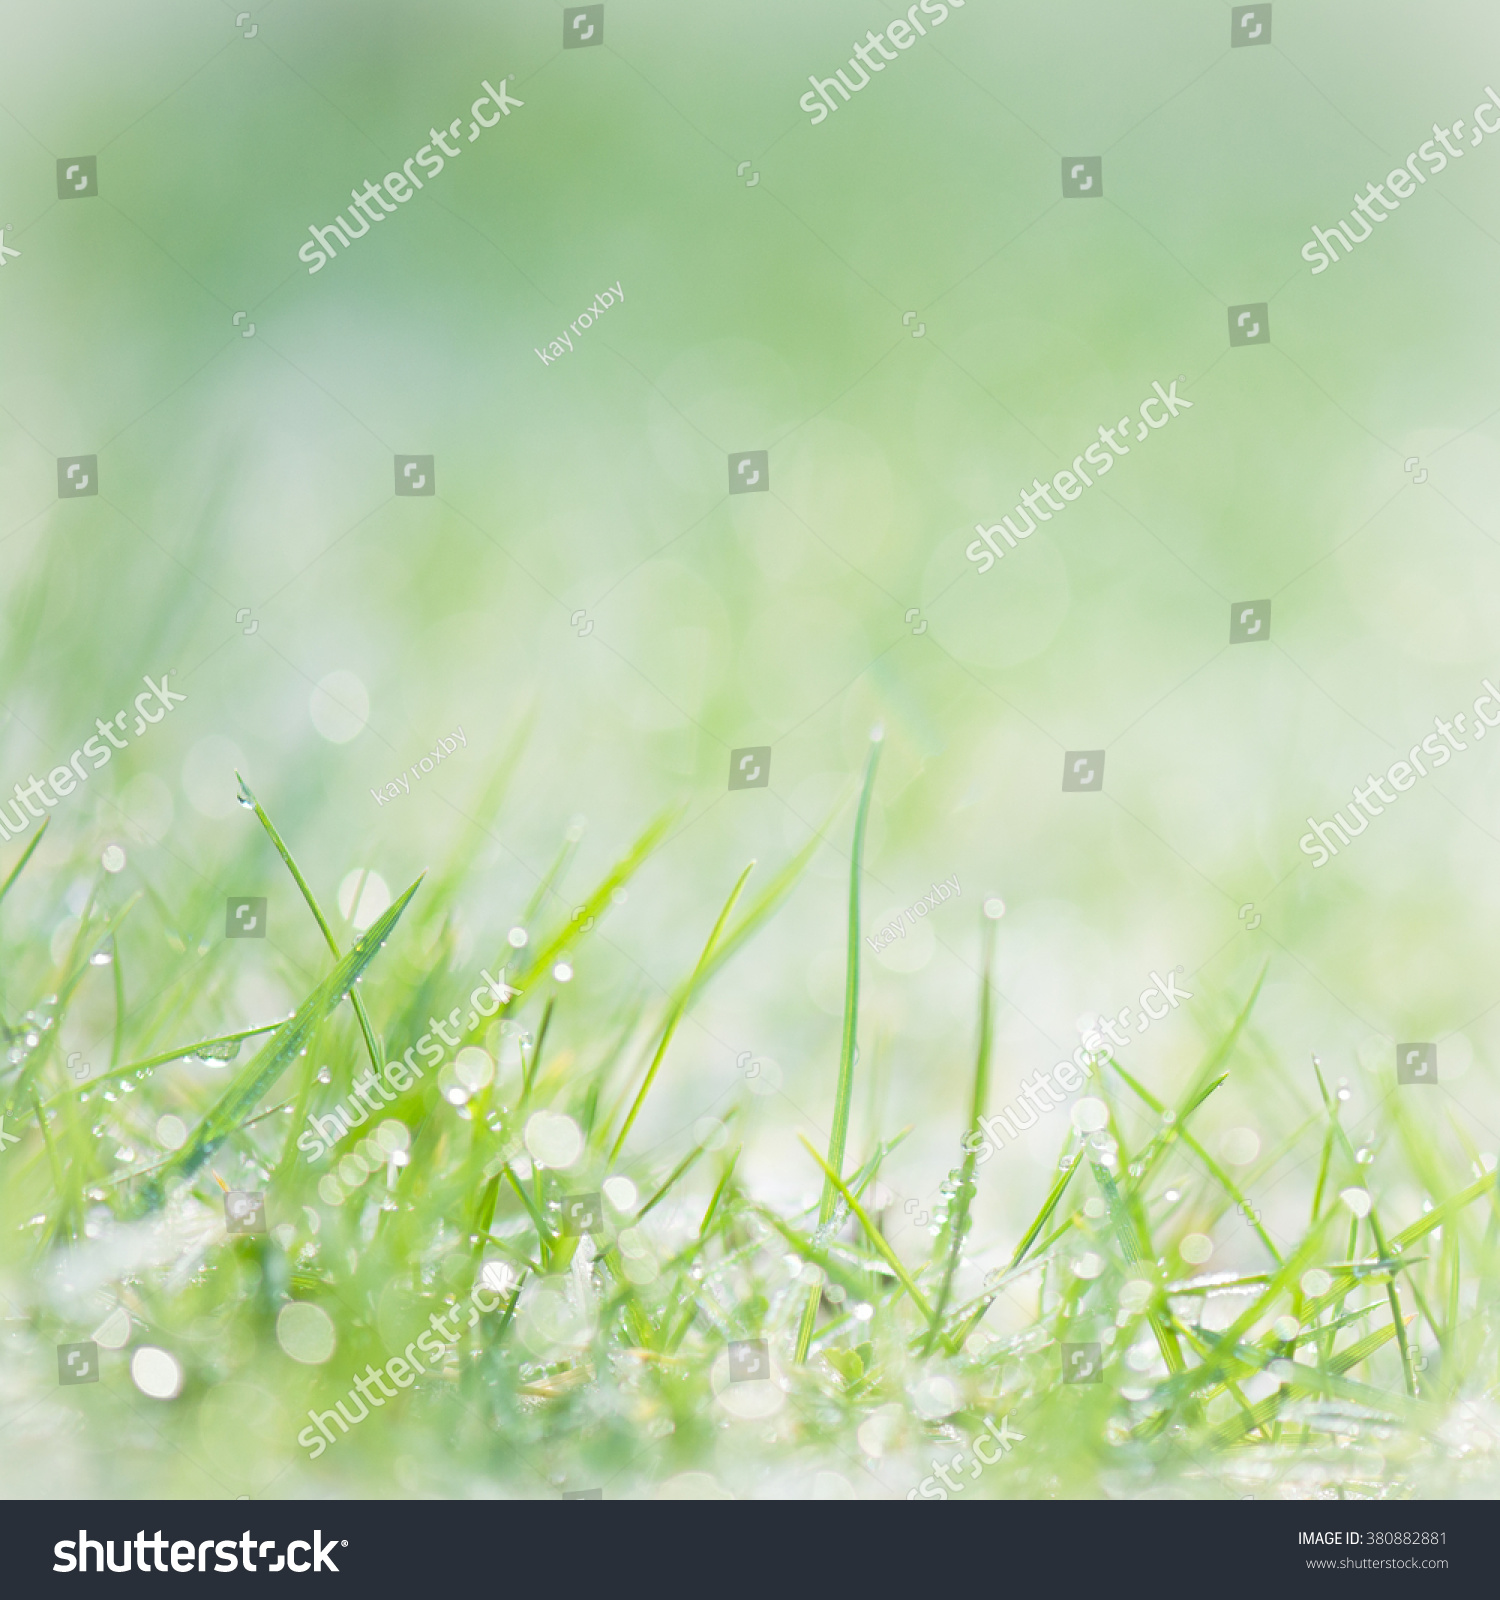 Green Grass Background Sparkling Dew Drops Stock Photo 380882881 ...